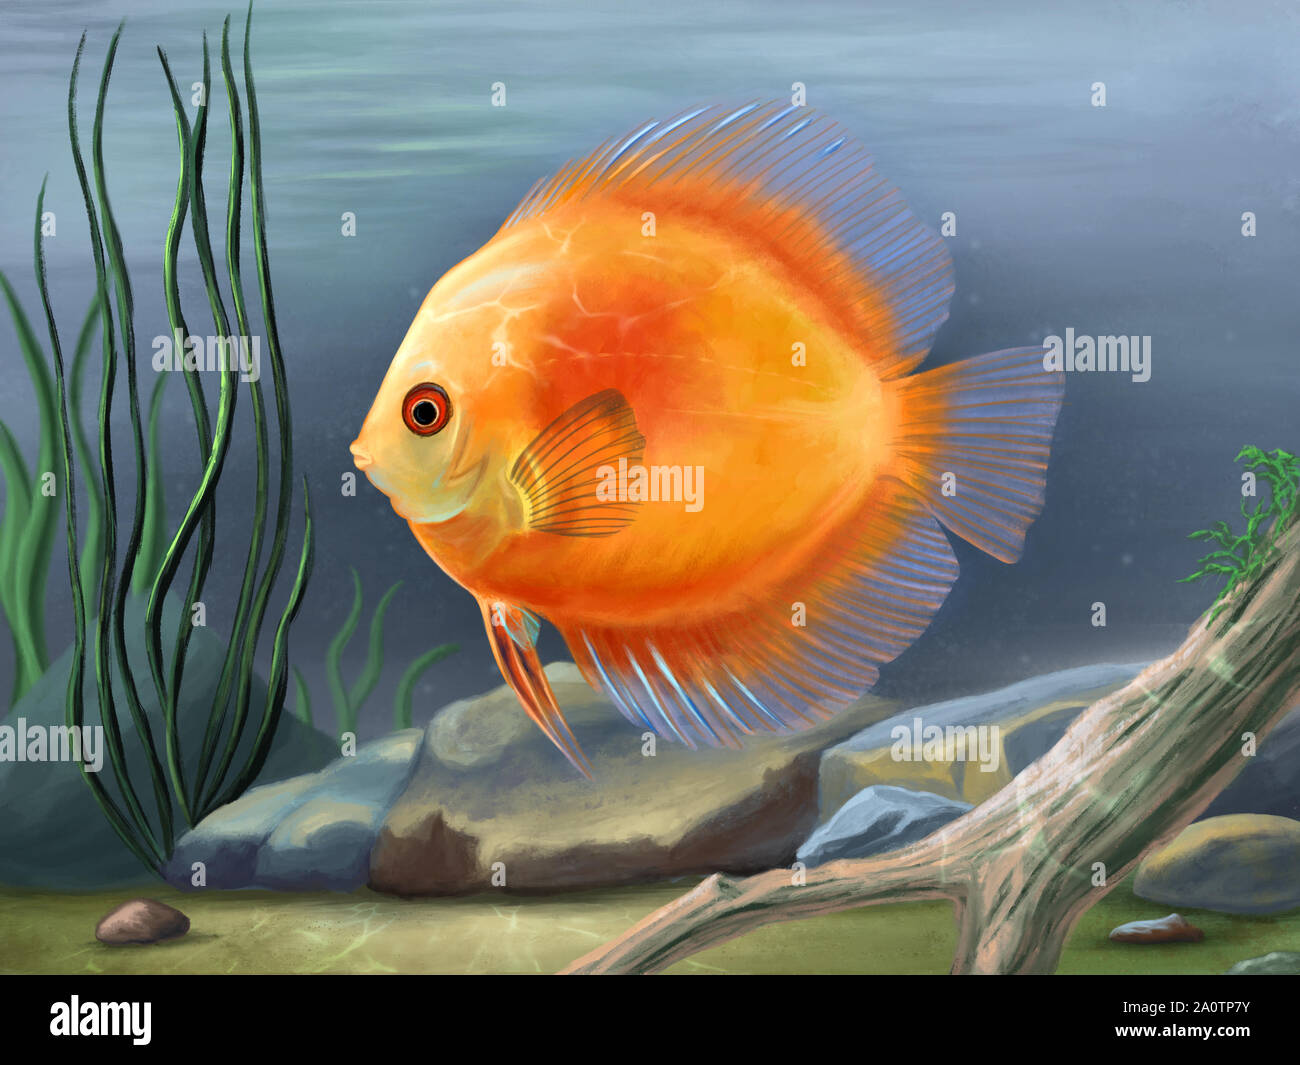 Discus fish, Symphysodon aequifasciatus, swimming in an underwater environment with stones and plants. Digital painting. Stock Photo